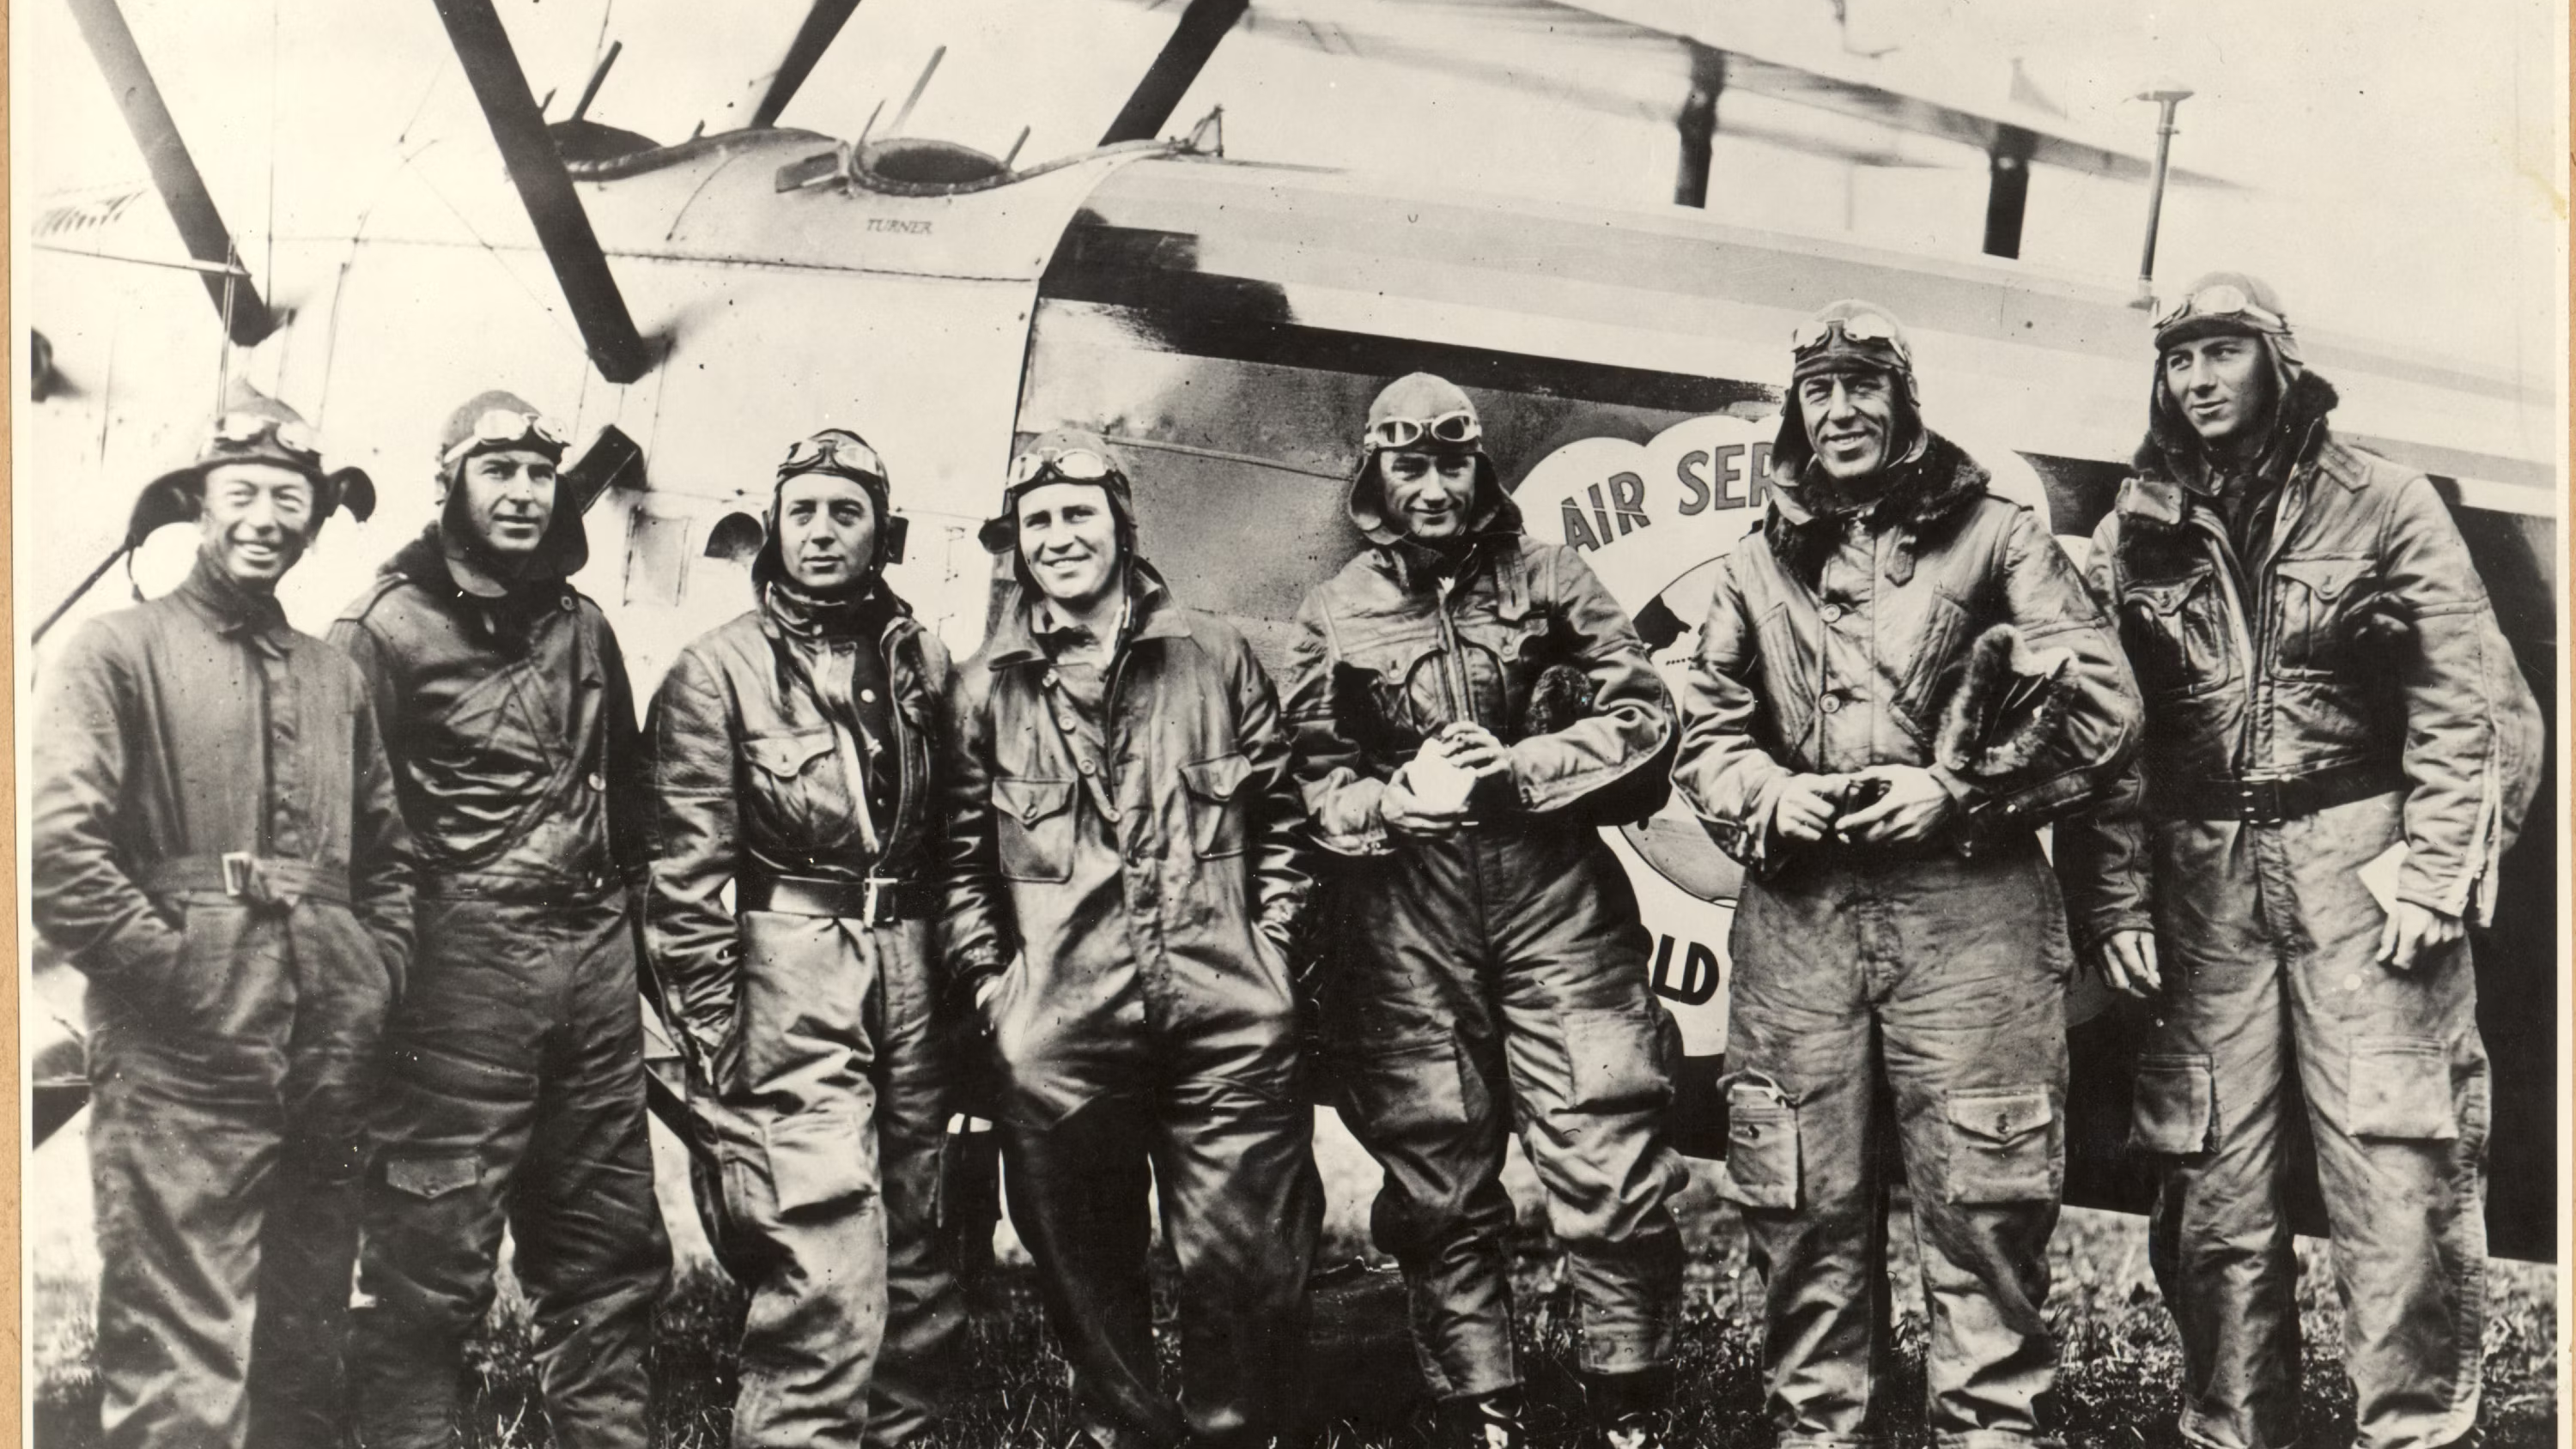 Several Air crew members from several nations standing near an aircraft.